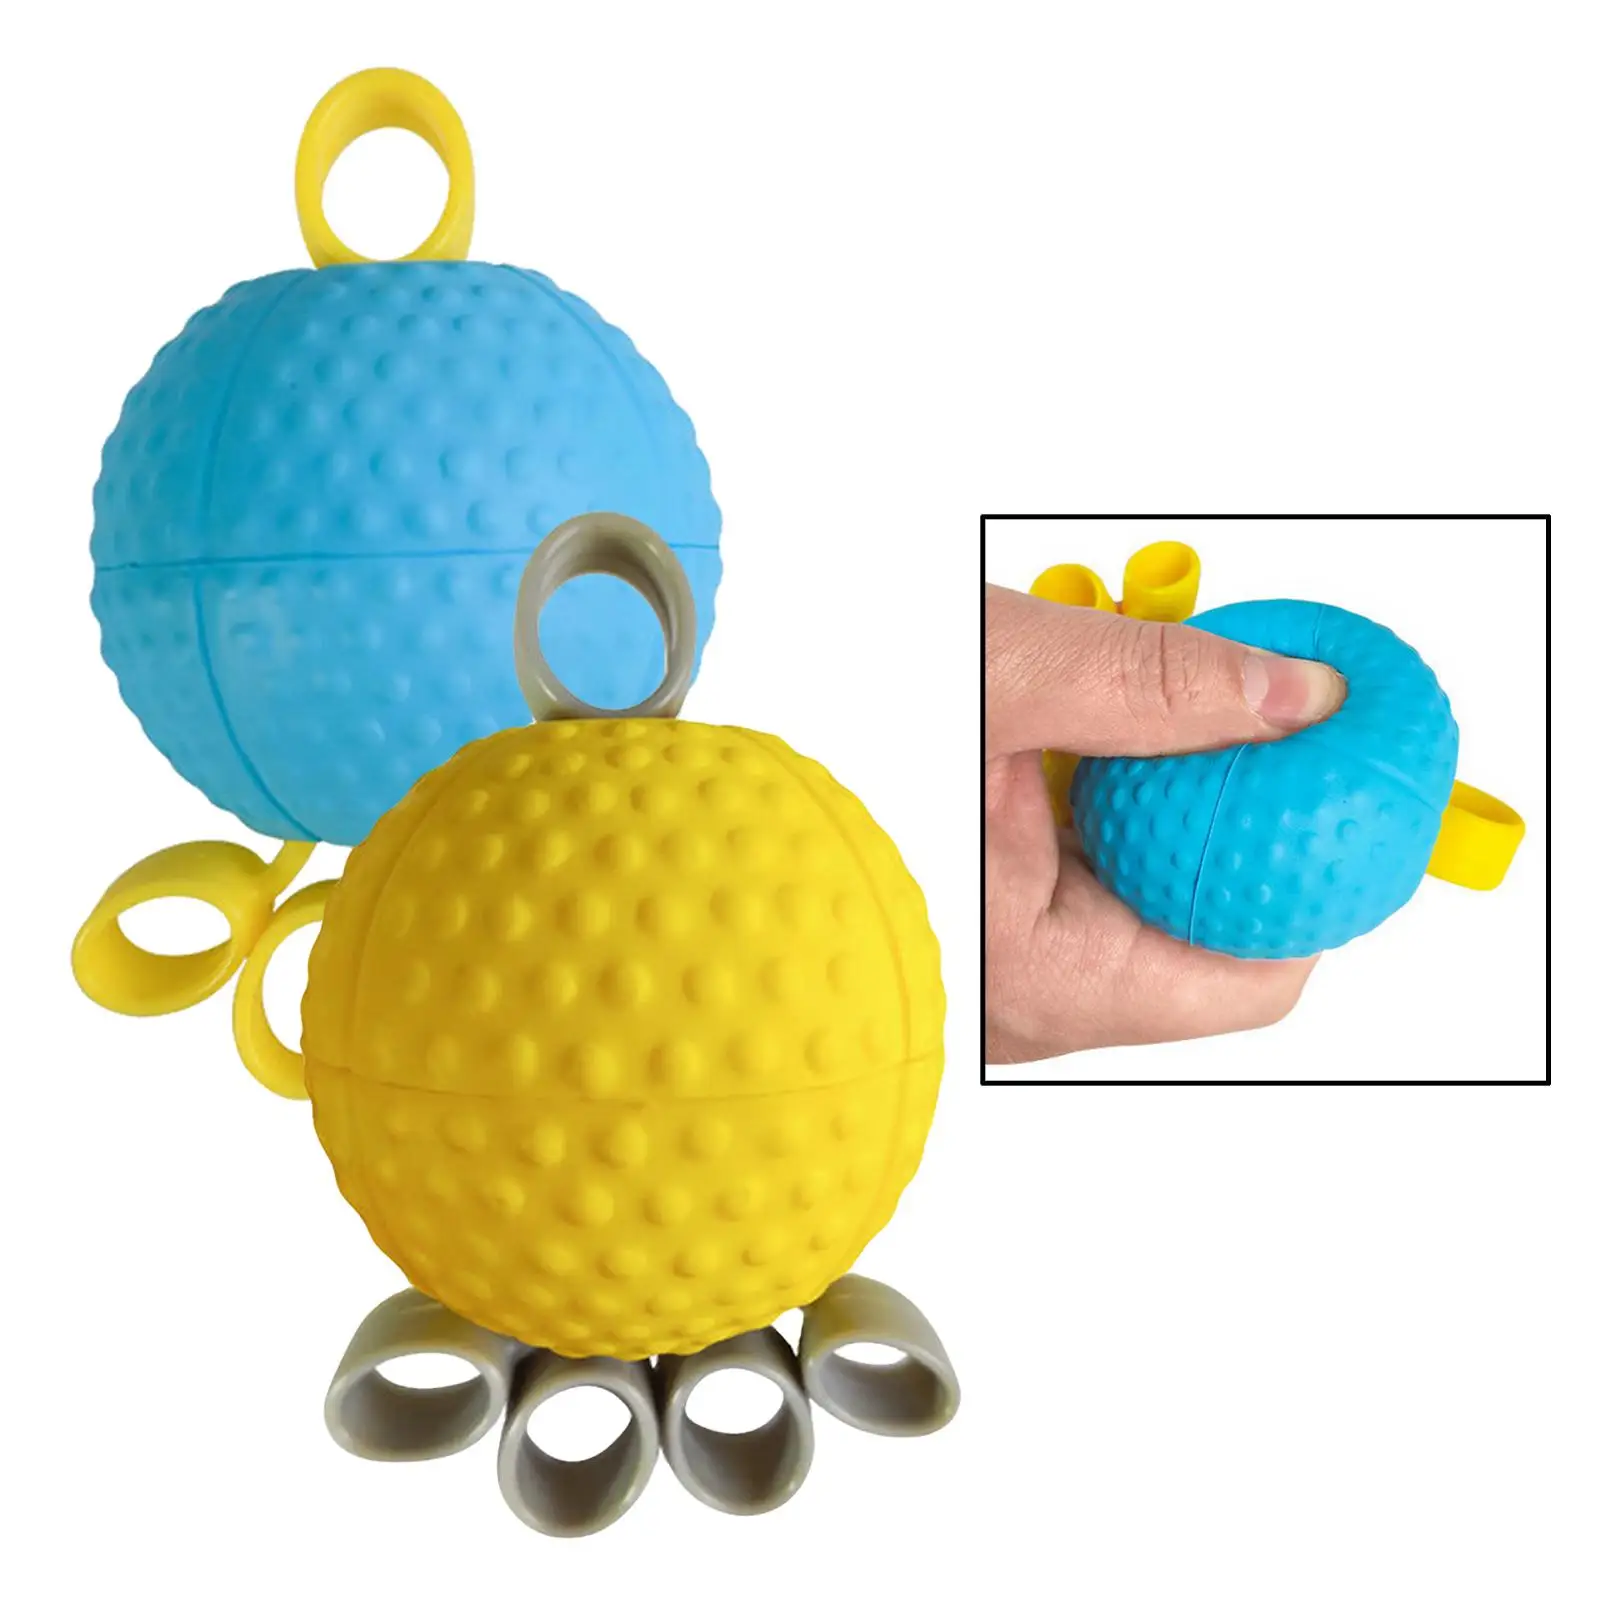 Finger Grip Ball Rehabilitation Training Anti-Spasticity Massage Finger Orthosis Stretcher for Adults Hand Cramps Squeeze Ball